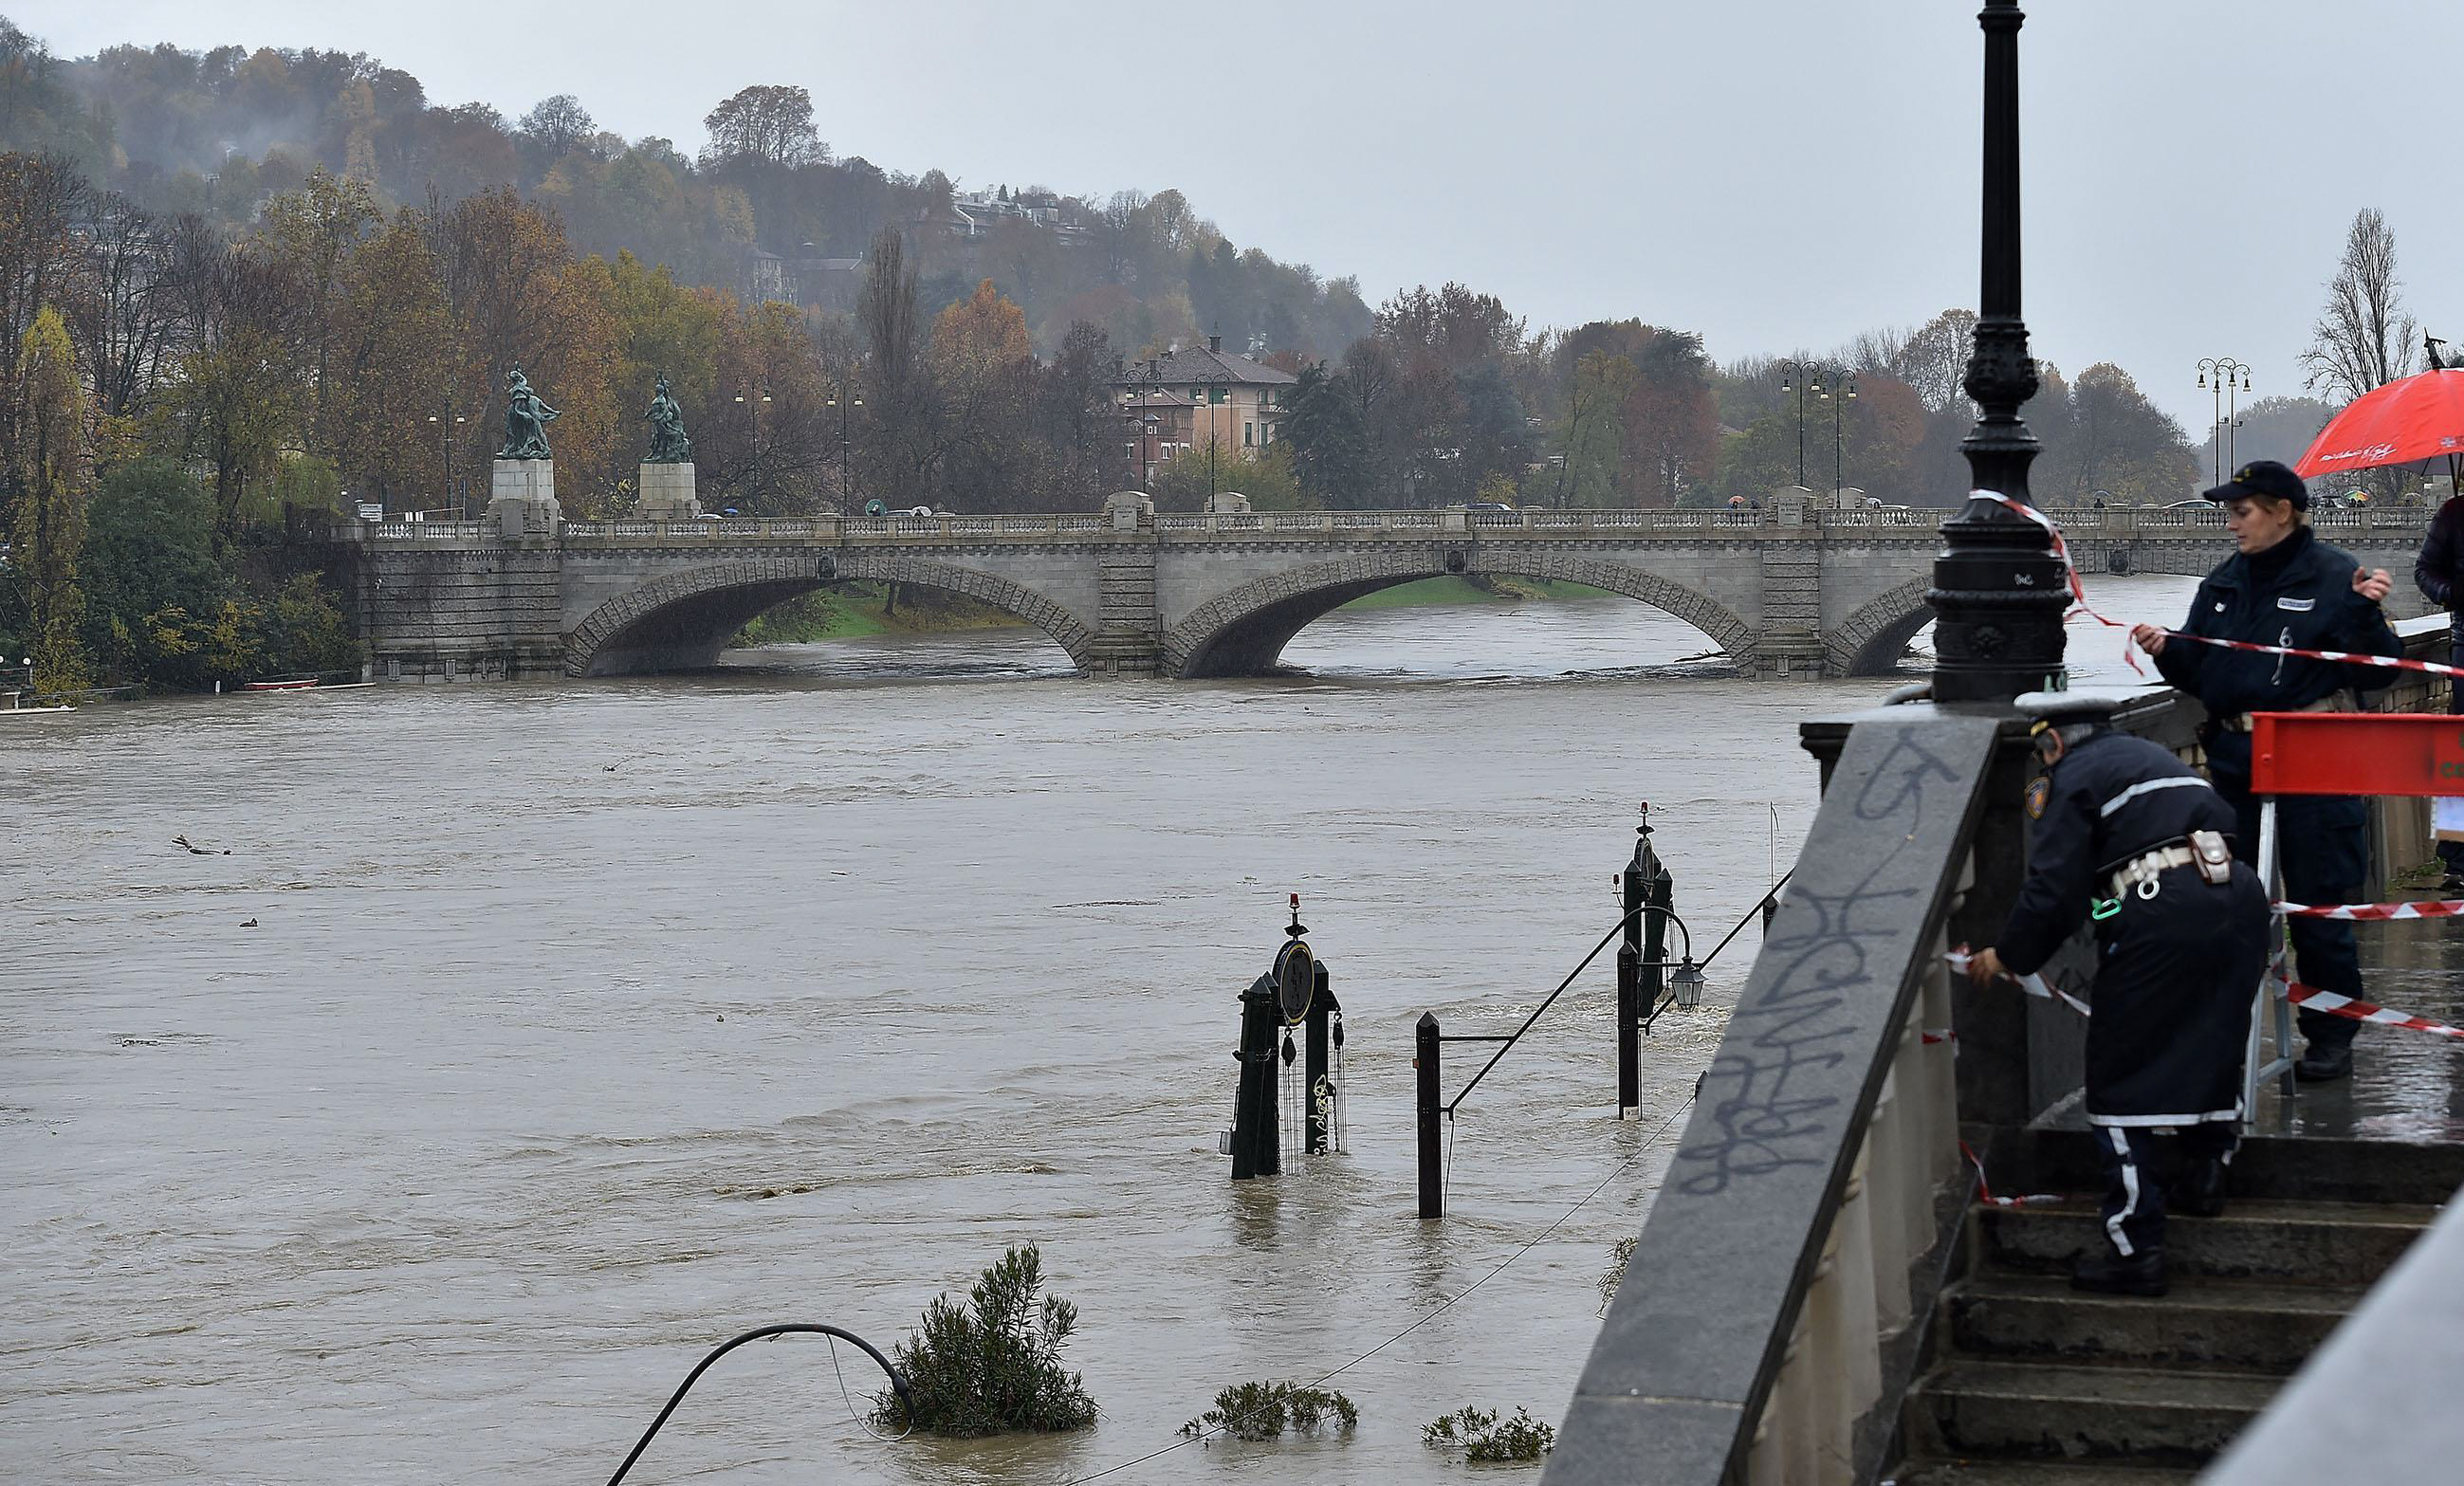 Police seal off a stairway leading to the river banks as the water levels of the river Po rise, in the Murazzi area of Turin